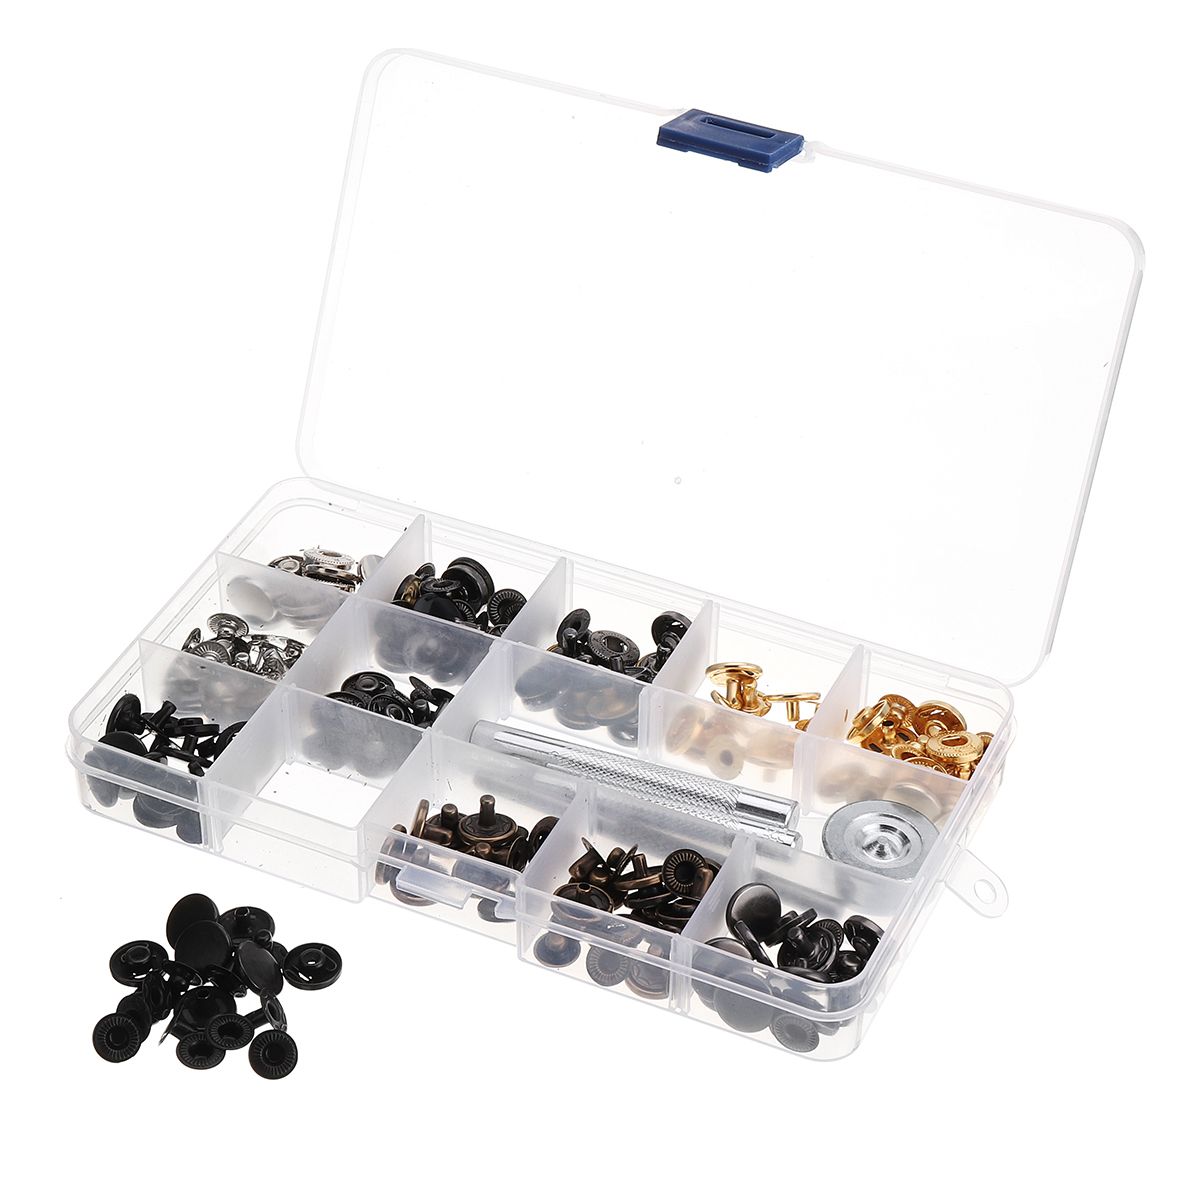 Metal-Snap-Press-Fastener-Stud-Popper-Button-Leather-Fabric-Jean-Fixing-Tools-Kit-1558971